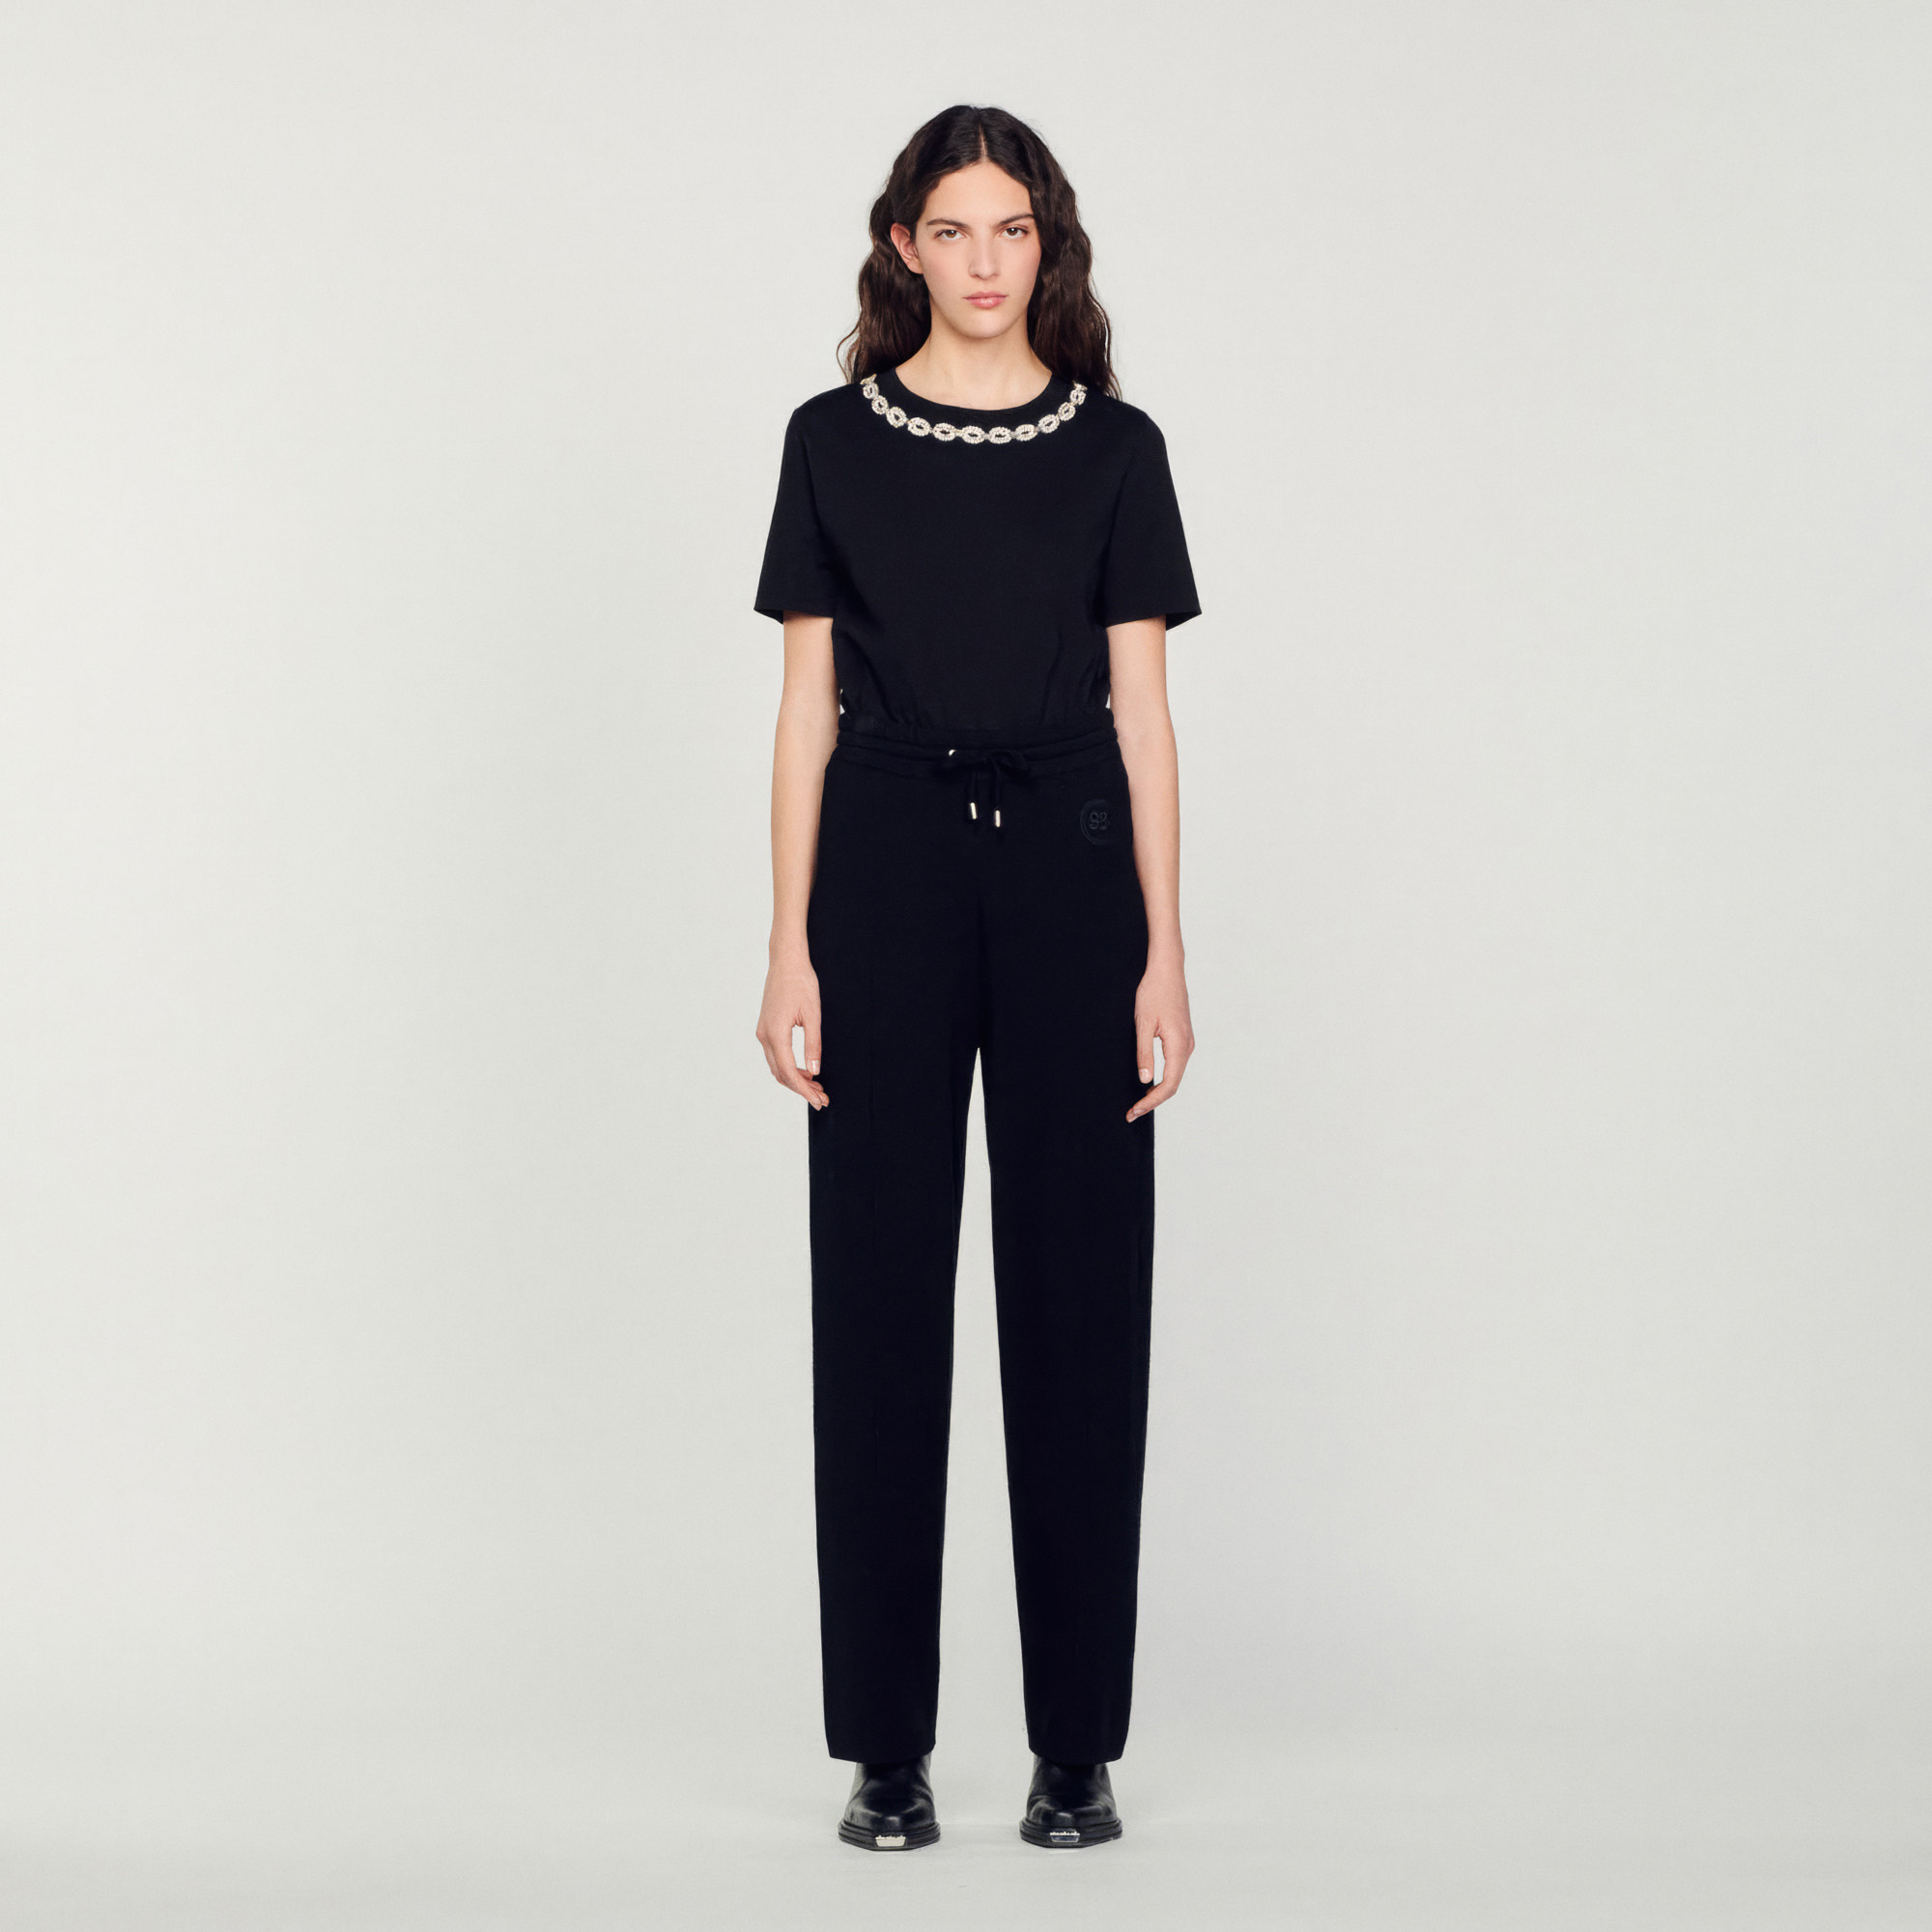 Sandro cotton Knitted straight-leg jogging bottoms with a drawstring waist and tone-on-tone logo